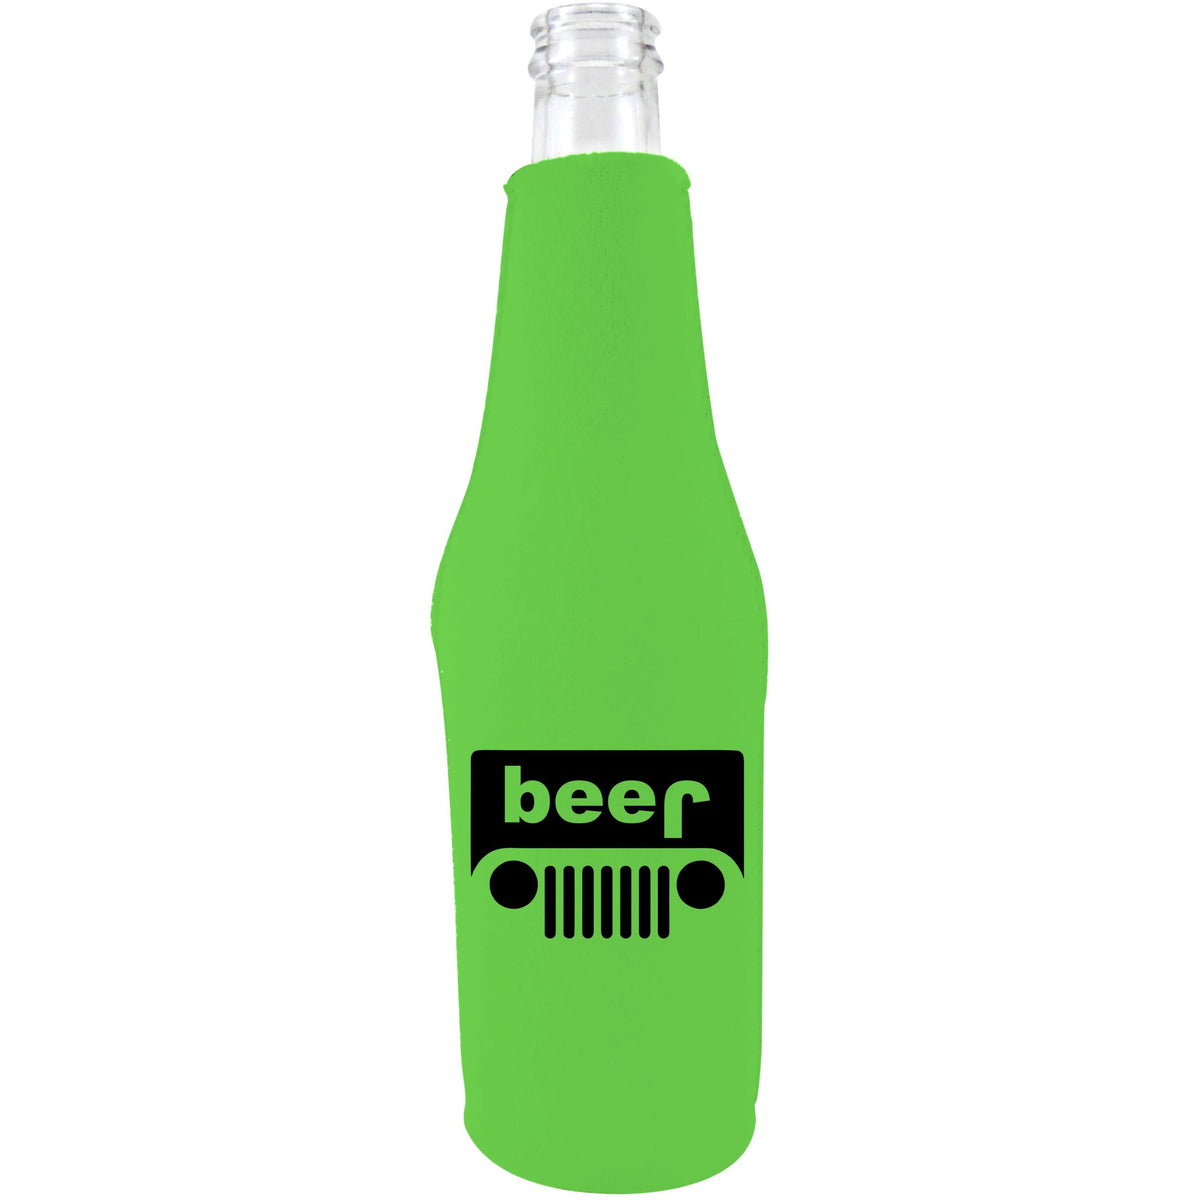 Beer jeep 16 oz. Can Coolie